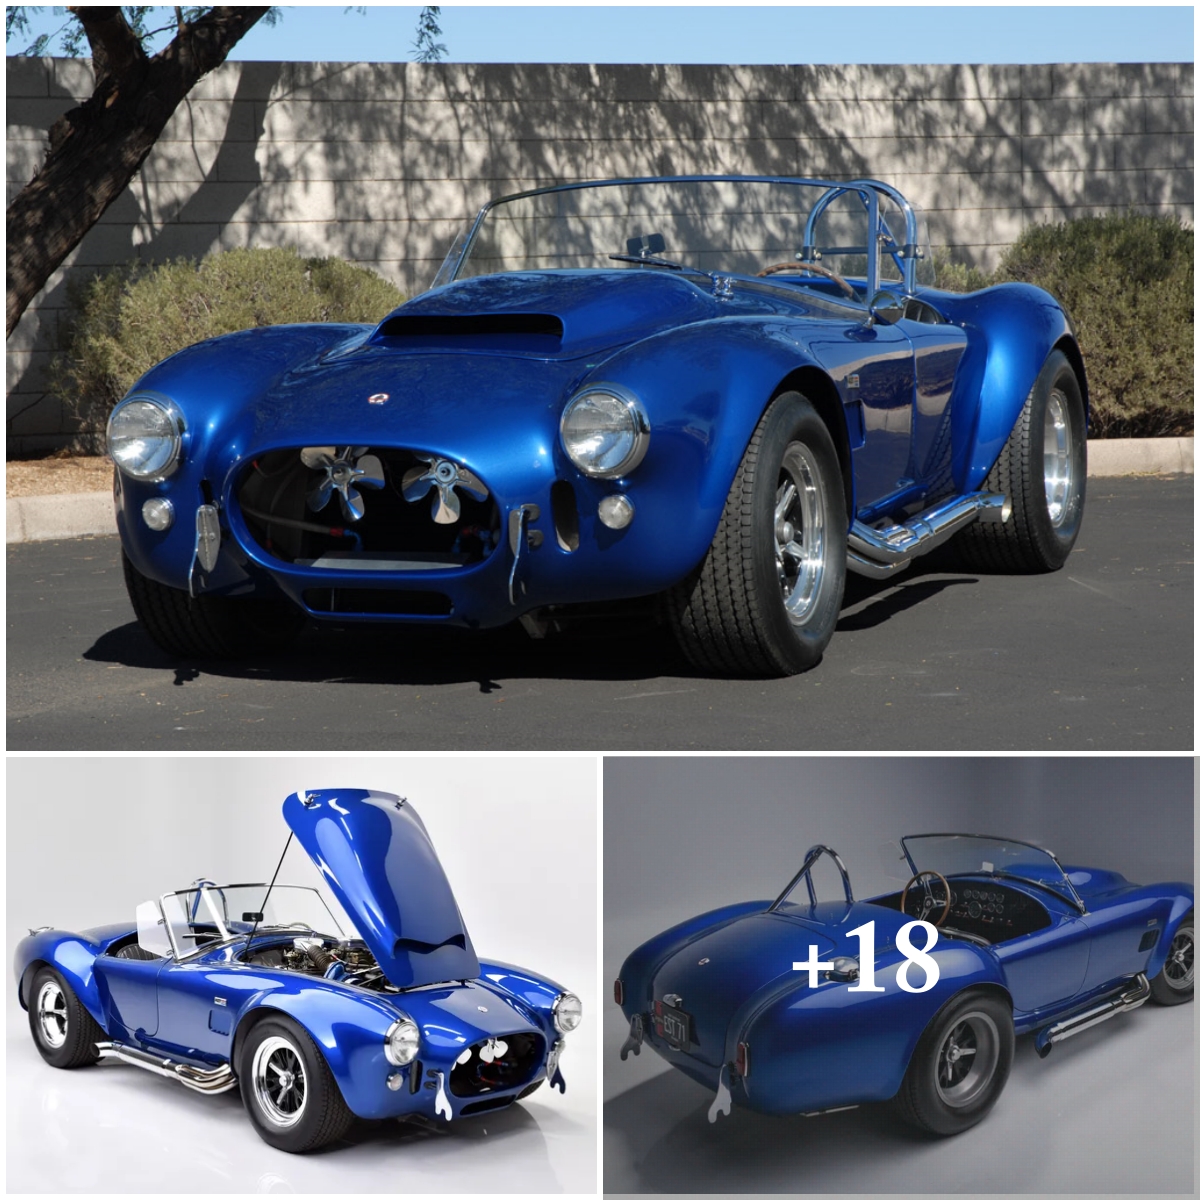 1966 Shelby Cobra Super Snake, the Epitome of Speed and Power, Heads to Auction